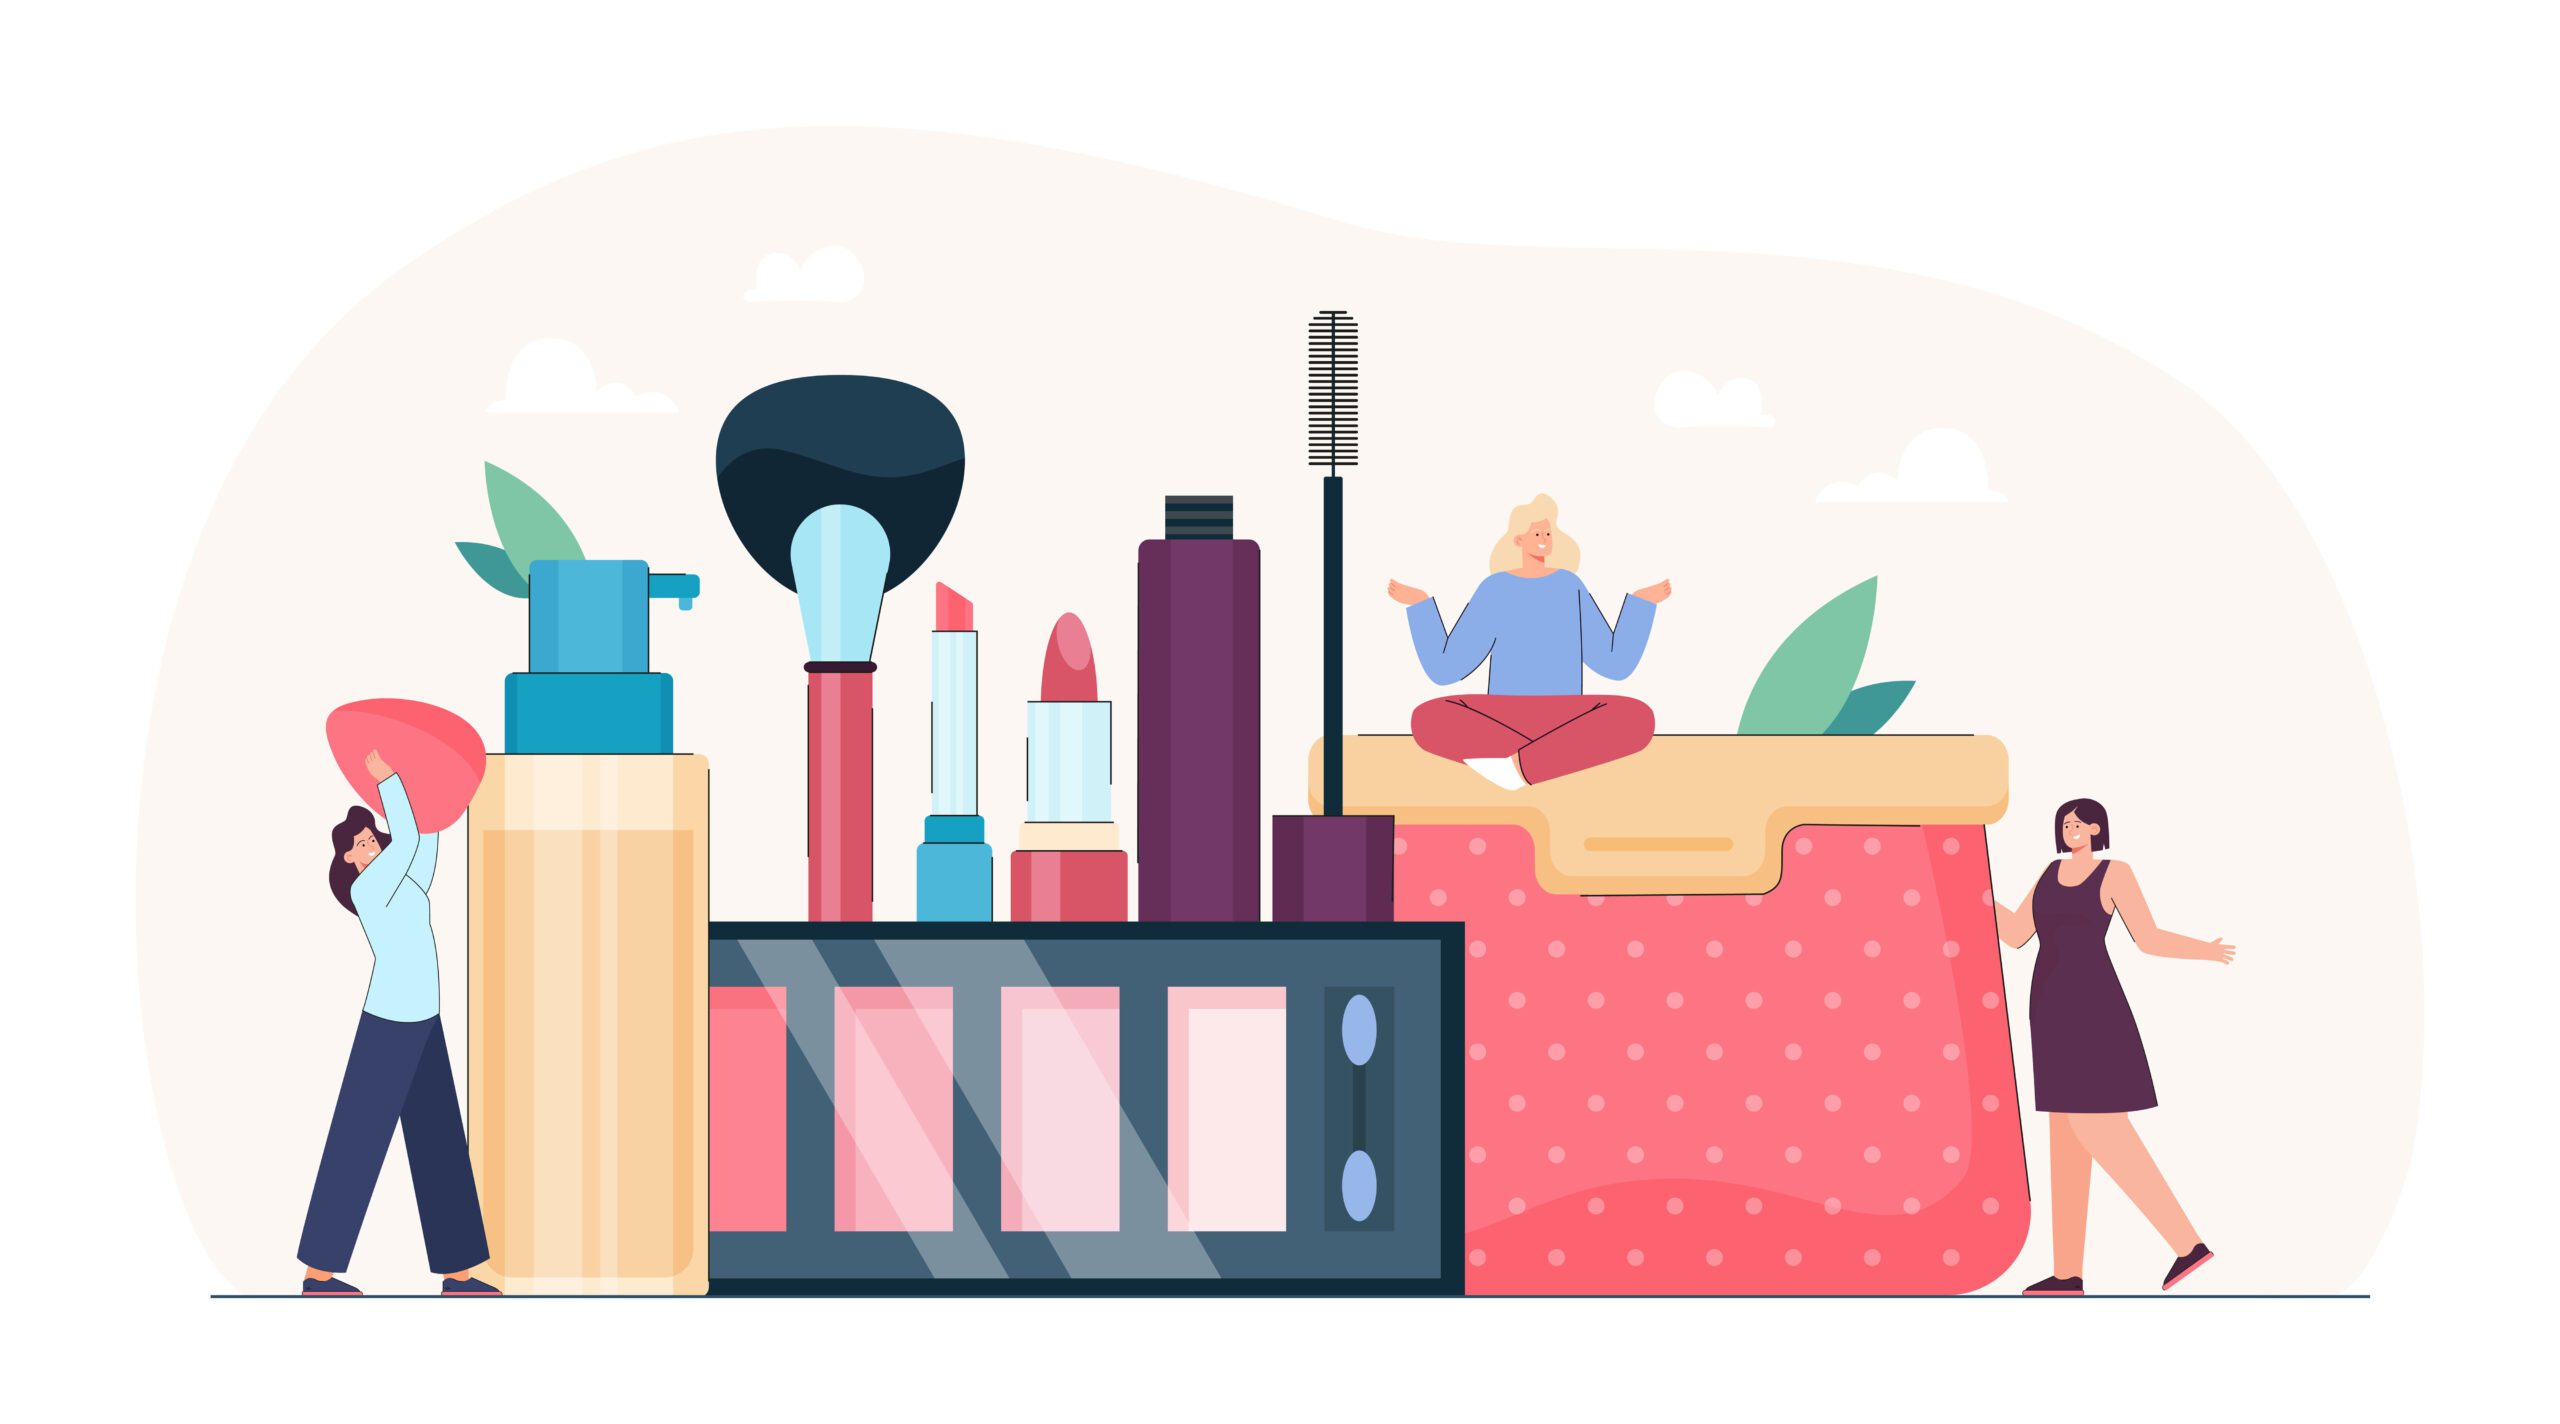 Beauty & Personal Care Industry: Trends accelerating BPC eCommerce growth in India